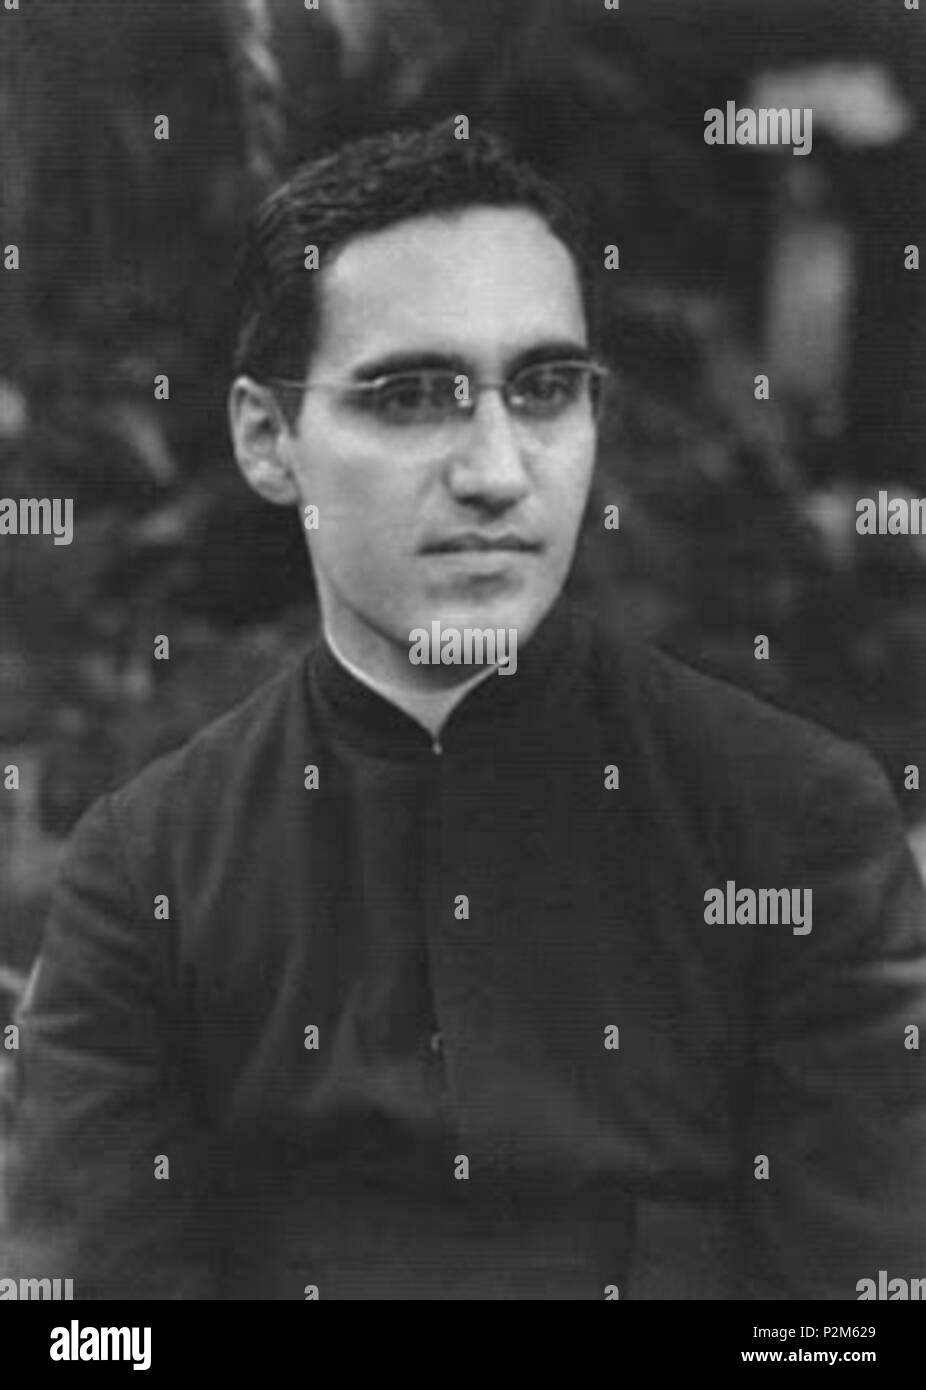 . English: On May 24, 1941, a young Oscar Romero, studying for the priesthood in Rome, prayed to the Sacred Heart of Jesus to, 'Burn off the slag and make me an iron, red hot with your love.' (J. Delgado, 'Romero, Un joven aspirante a la santidad' (Romero, a young aspirant to saintliness), ORIENTACIÓN, Vol. LV Nº 5463, March 25, 2007.) Español: Óscar Arnulfo Romero en 1941. 24 May 1941. Unknown 57 MOAR 3 Stock Photo